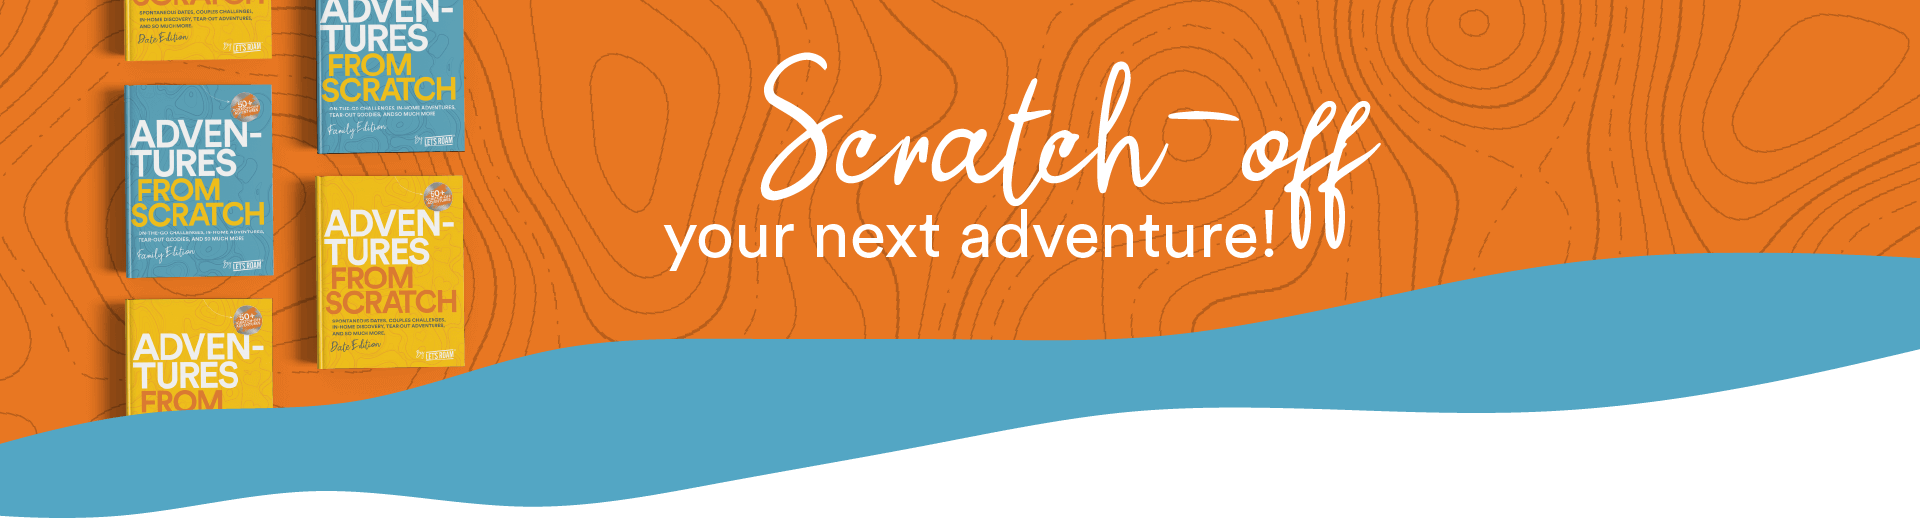 Adventures from Scratch